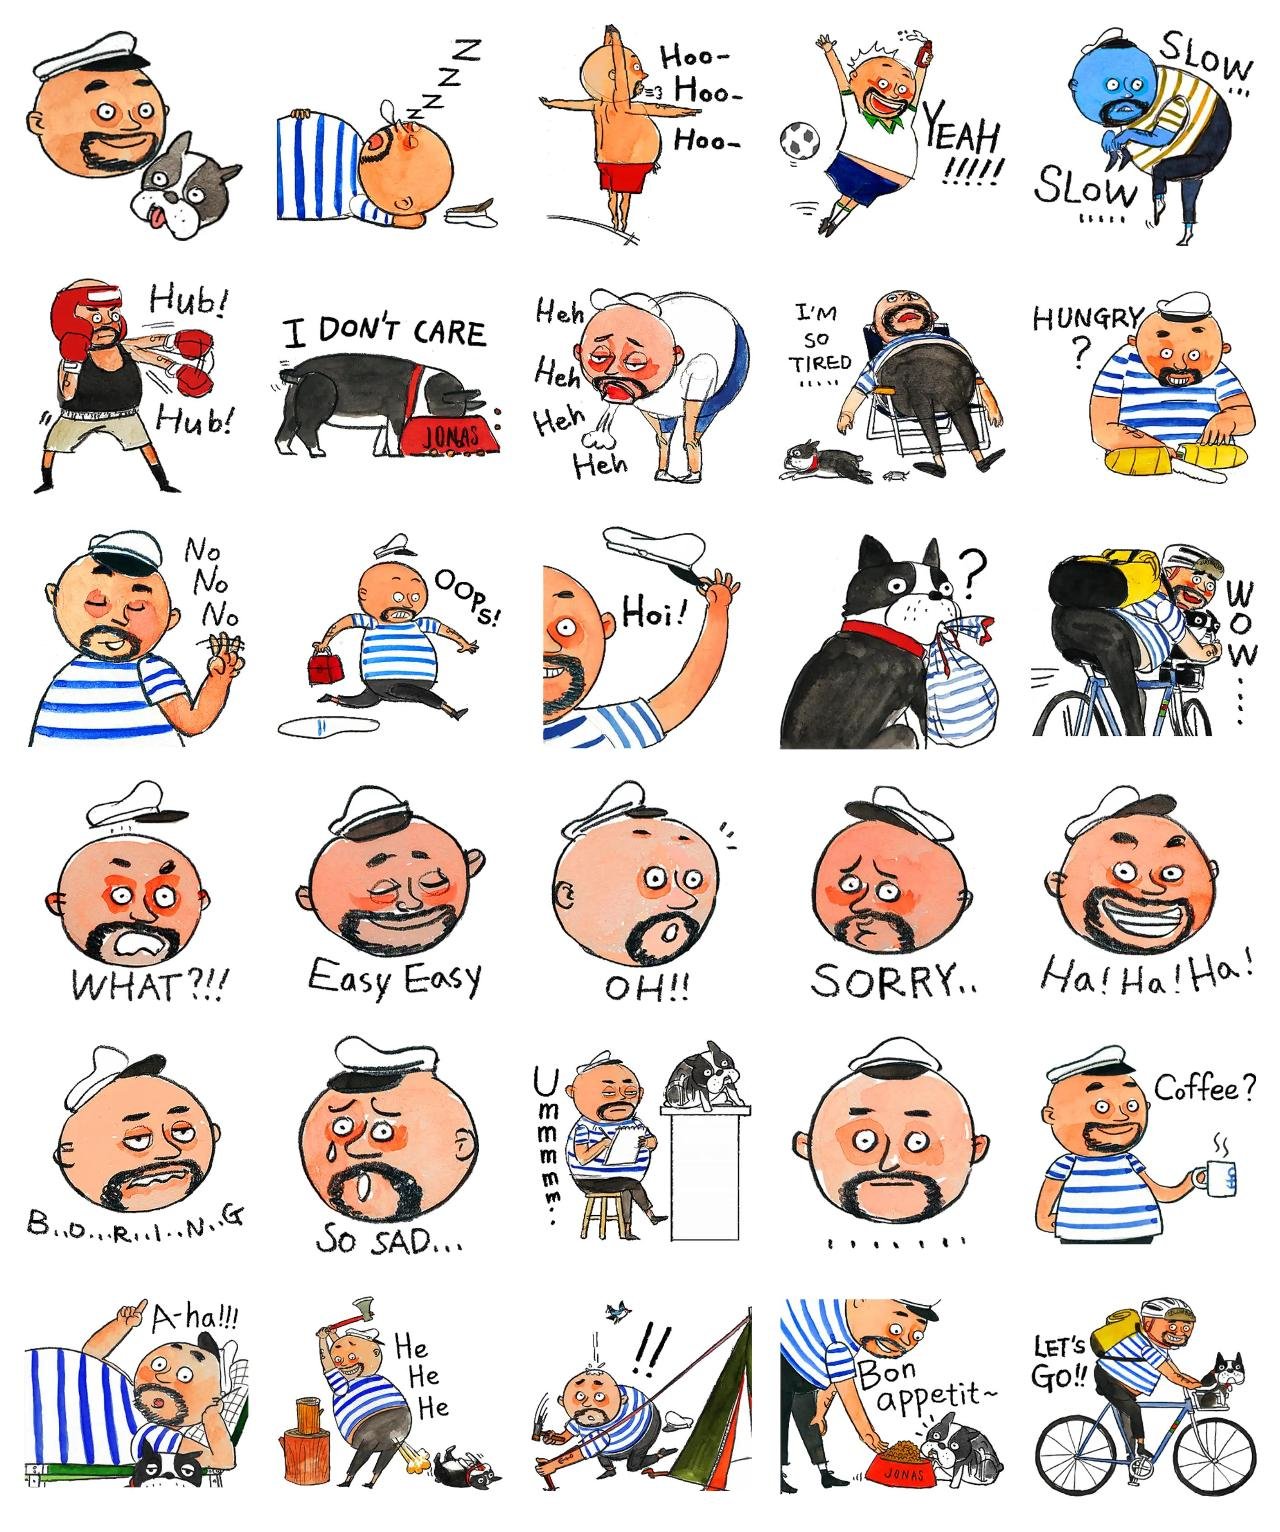 Grego & Jonas Animals,People sticker pack for Whatsapp, Telegram, Signal, and others chatting and message apps